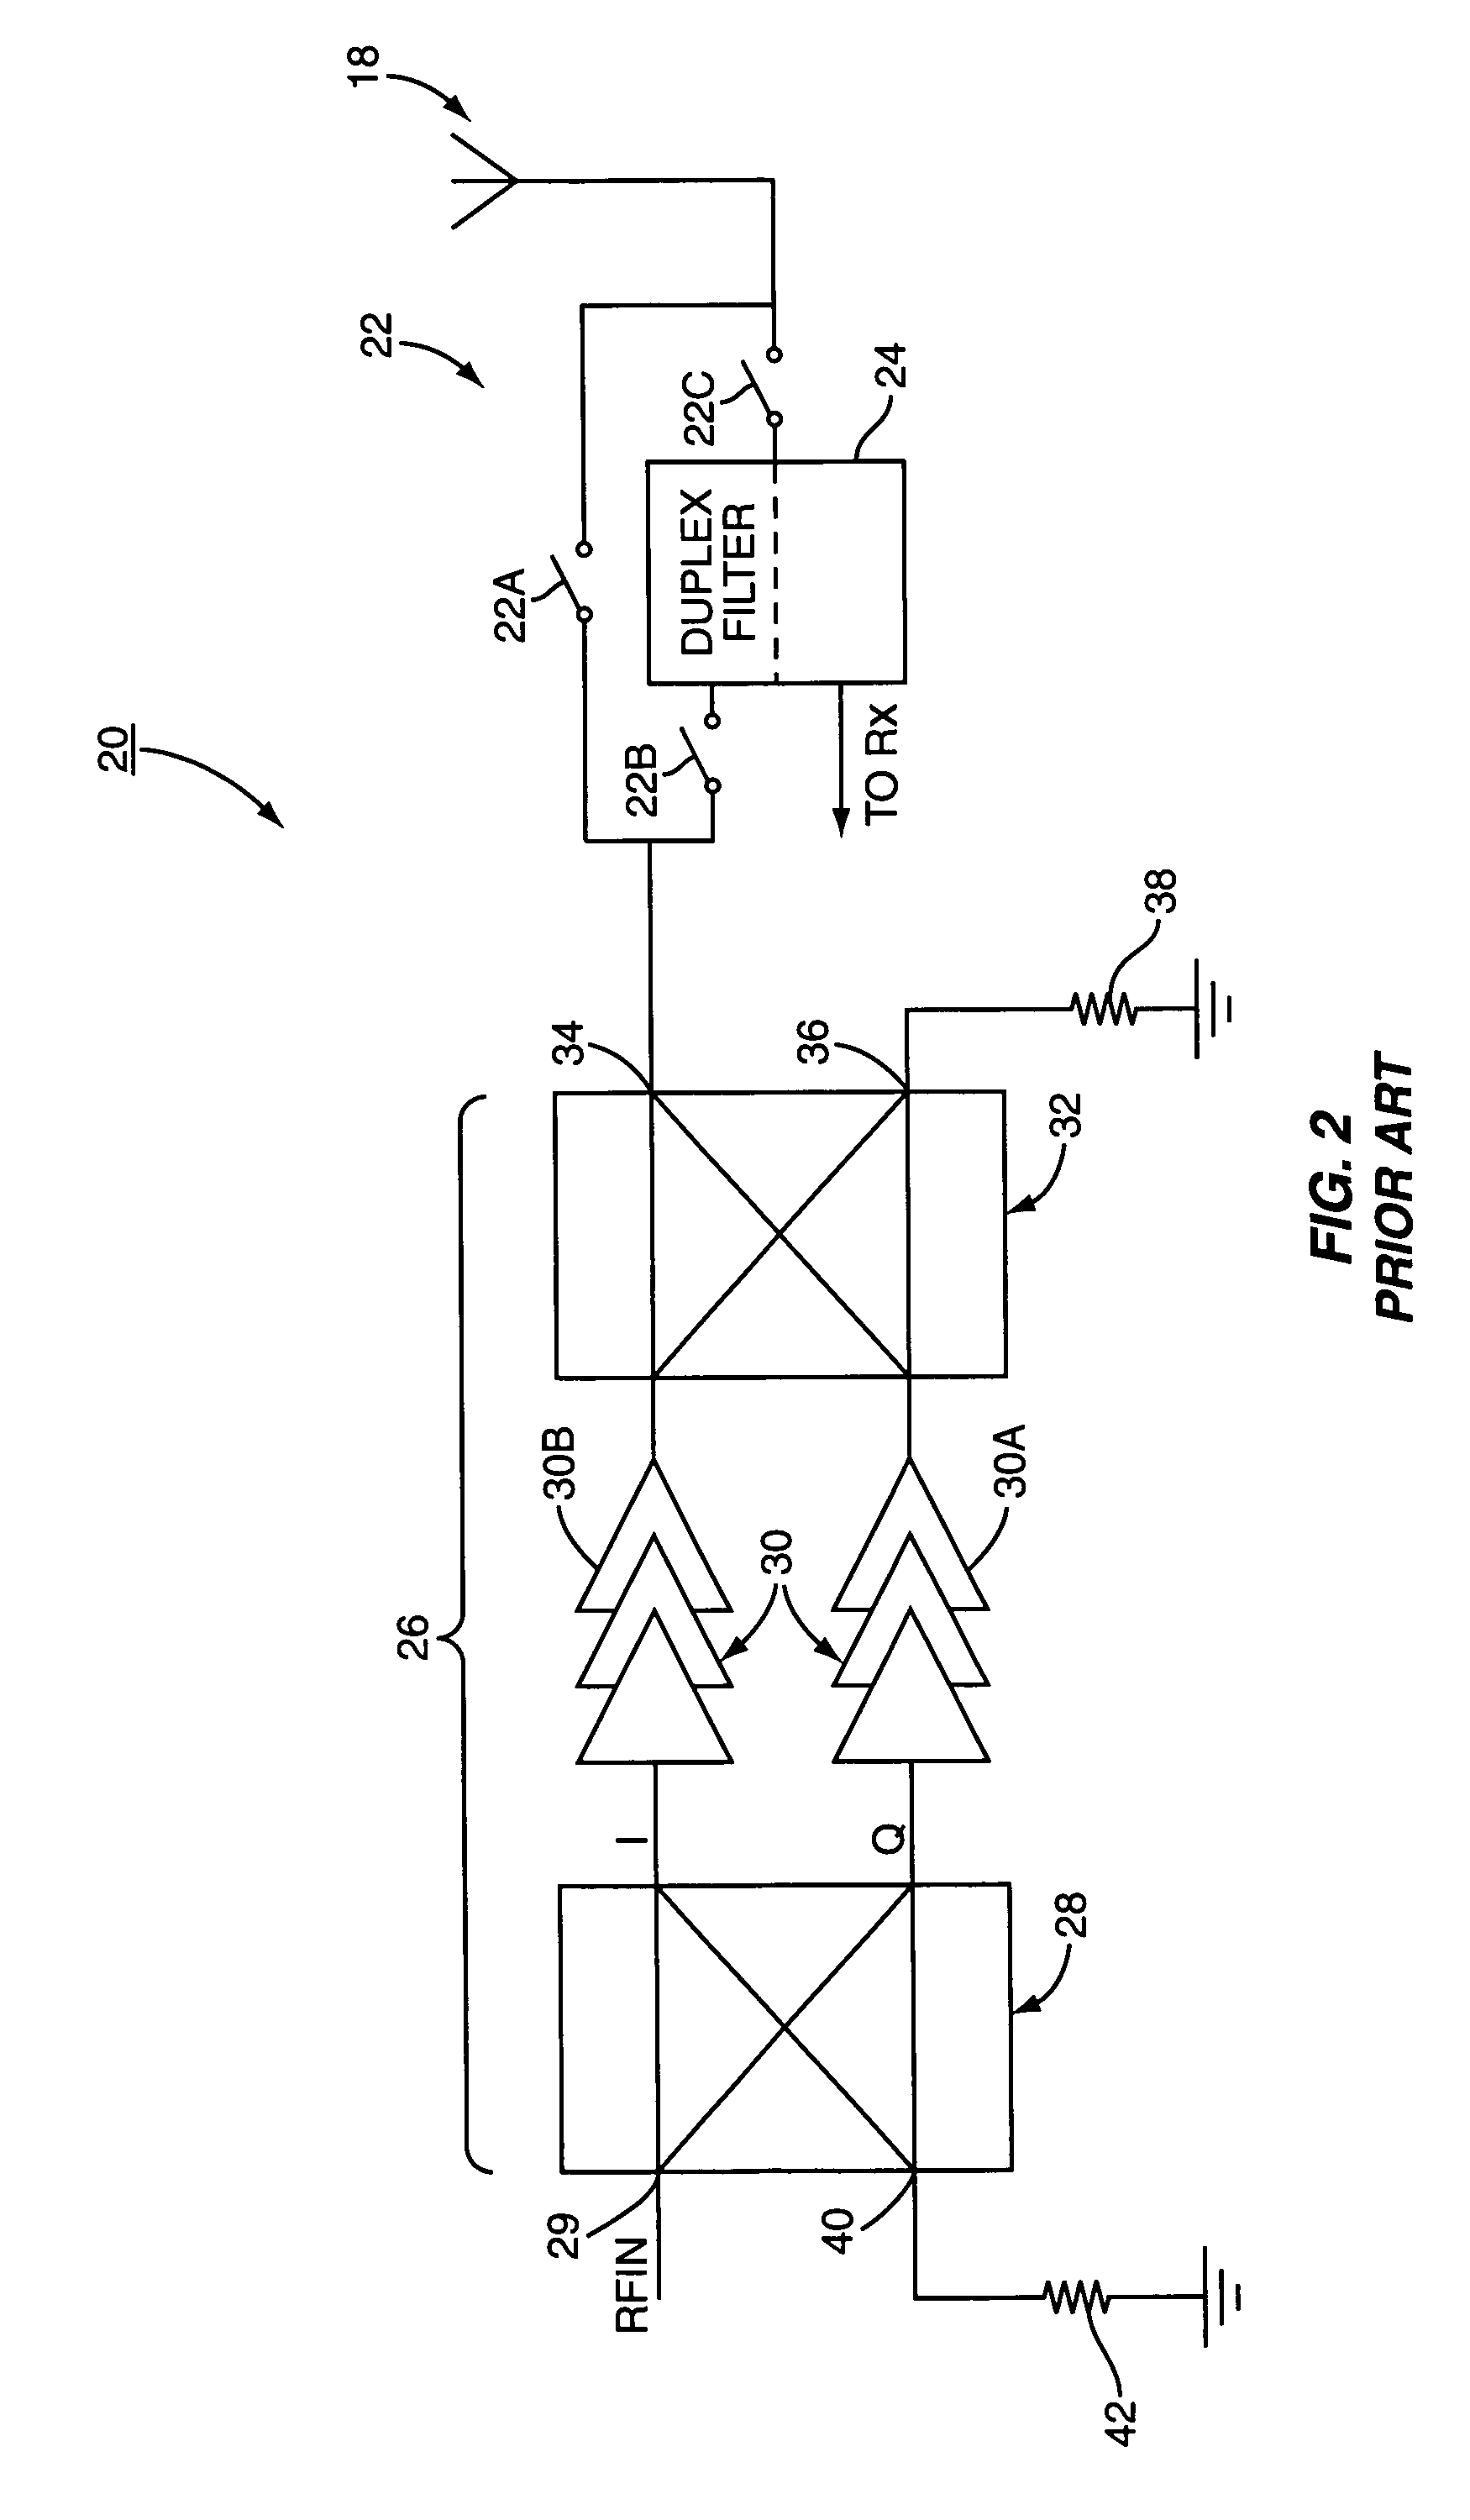 Power amplifier output switch using hybrid combiner